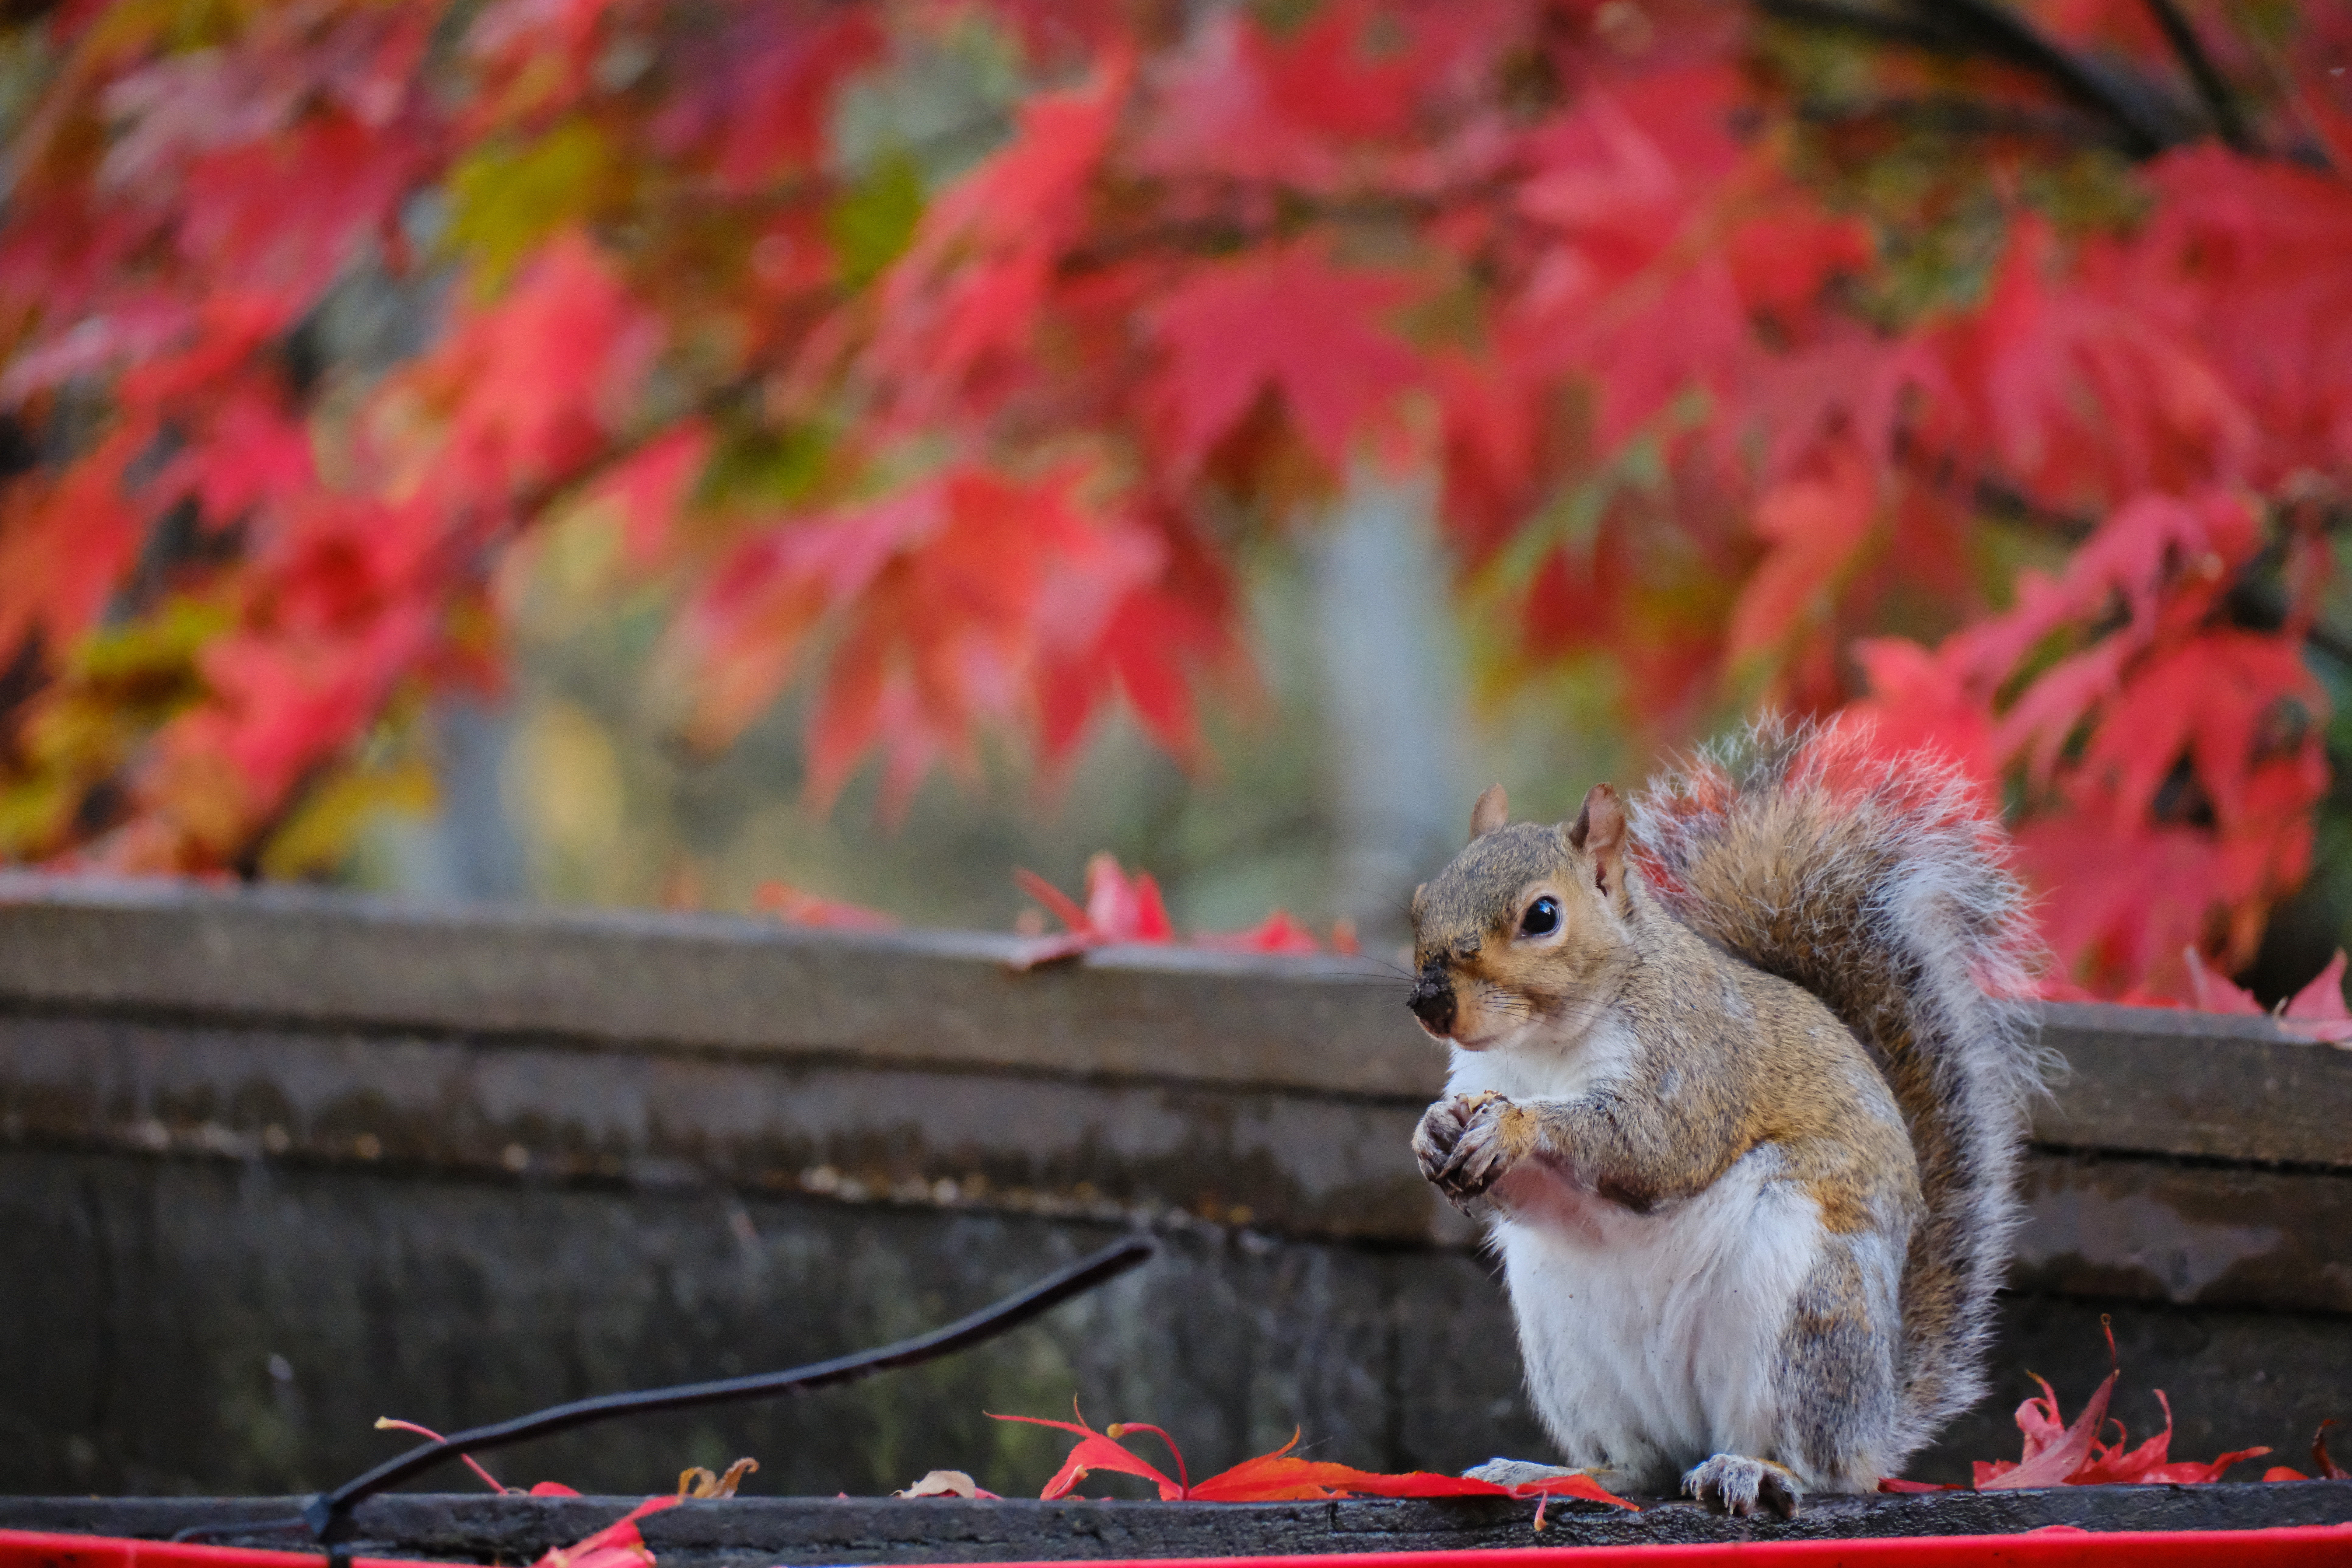 Fujifilm X-T5 sample image, squirrel with its hands clasped together, in the background out of focus red maple leaves 